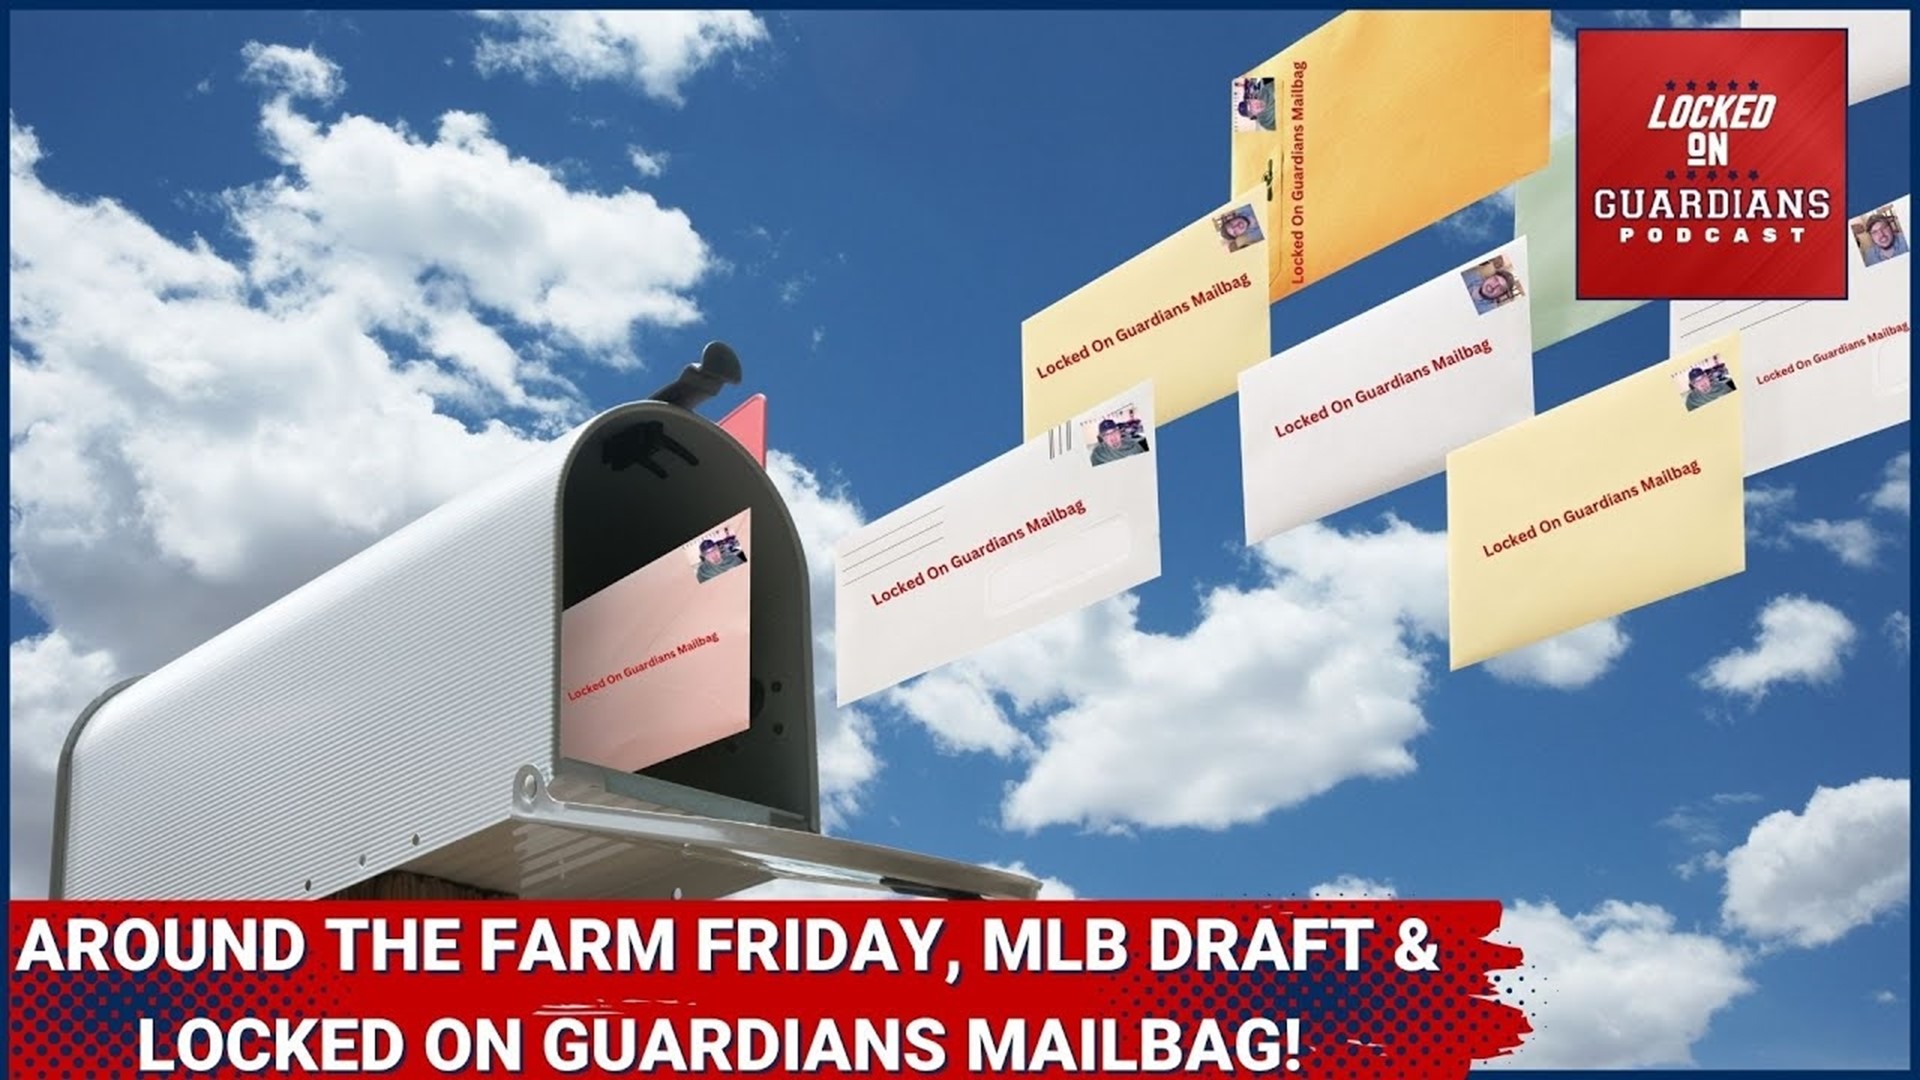 Around the Farm Friday, MLB Draft and a Mailbag Edition of Locked On Guardians